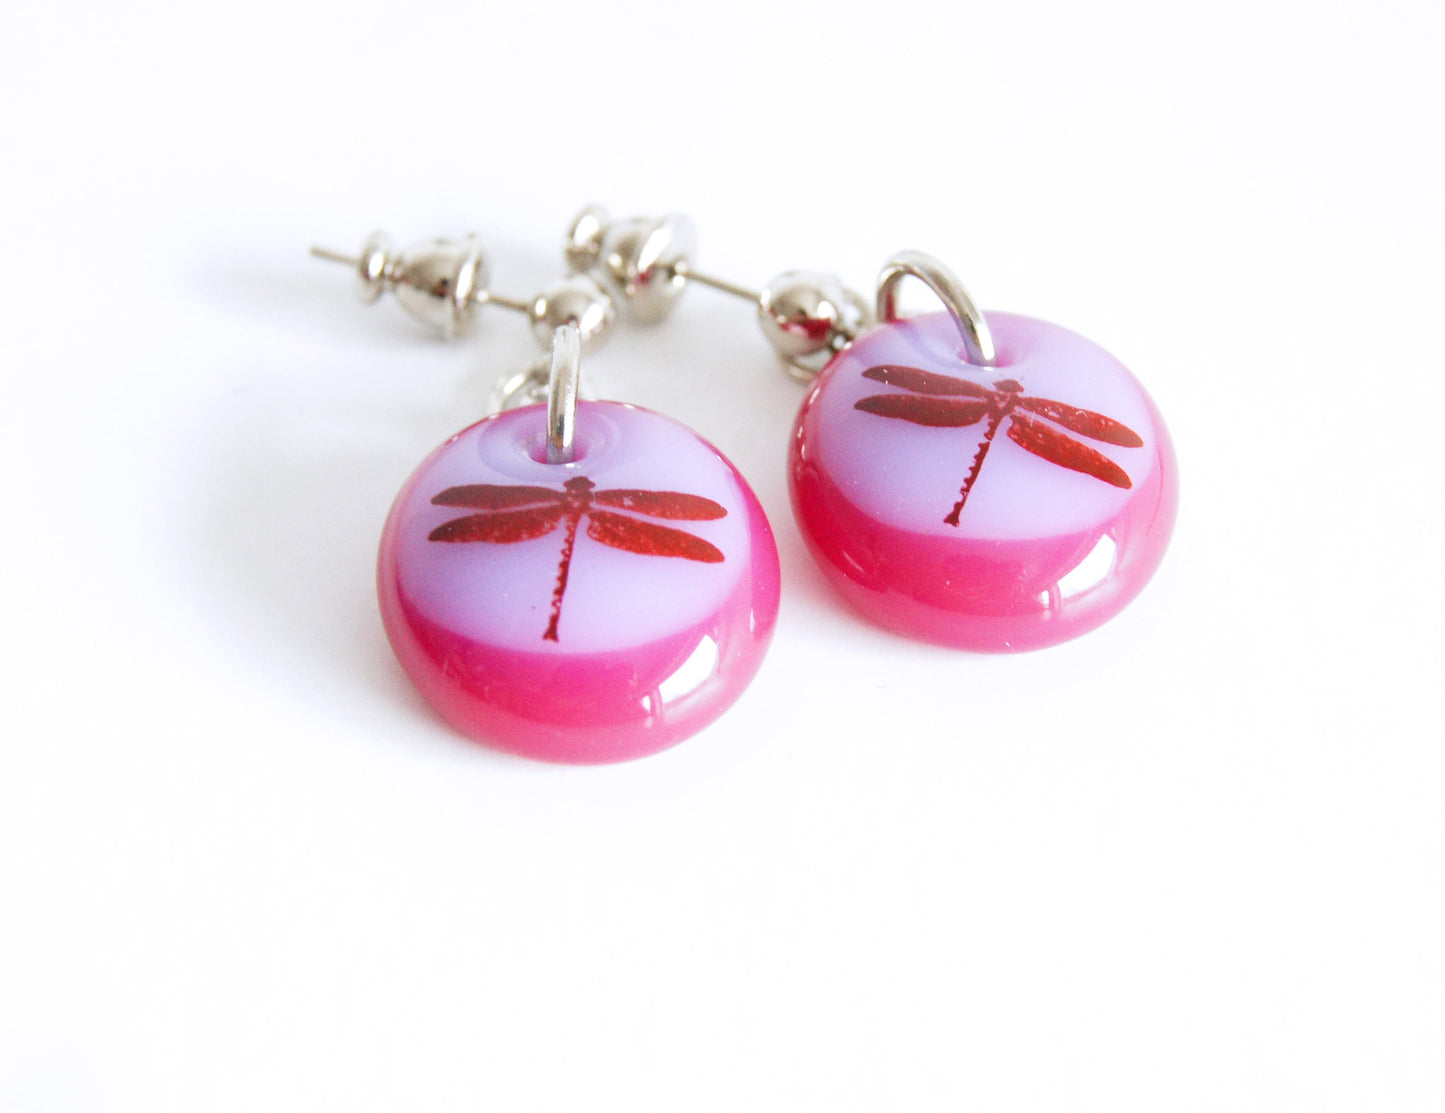 dragonflies on rose pink and lavender  glass drops